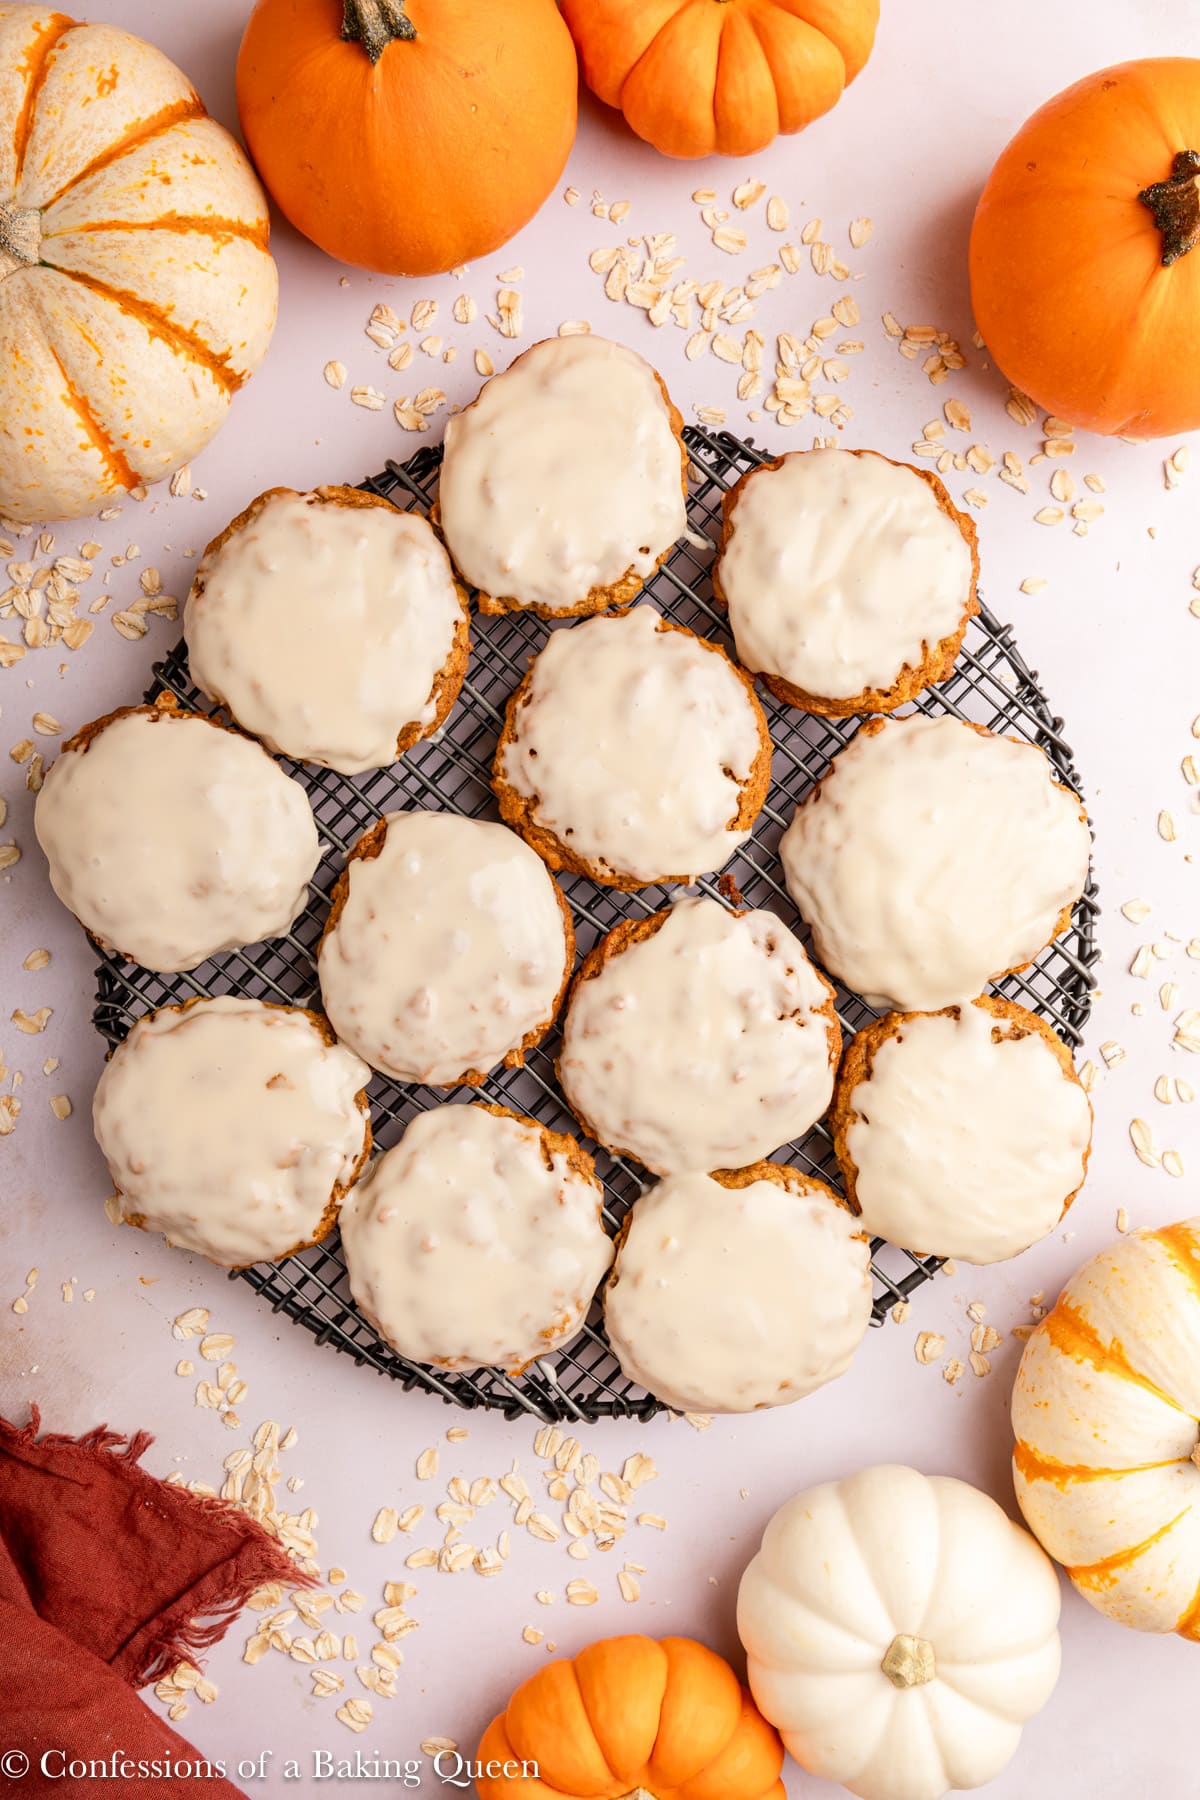 maple glazed pumpkin oatmeal cookies on a wire rack next to some pumpkin on a light surface.